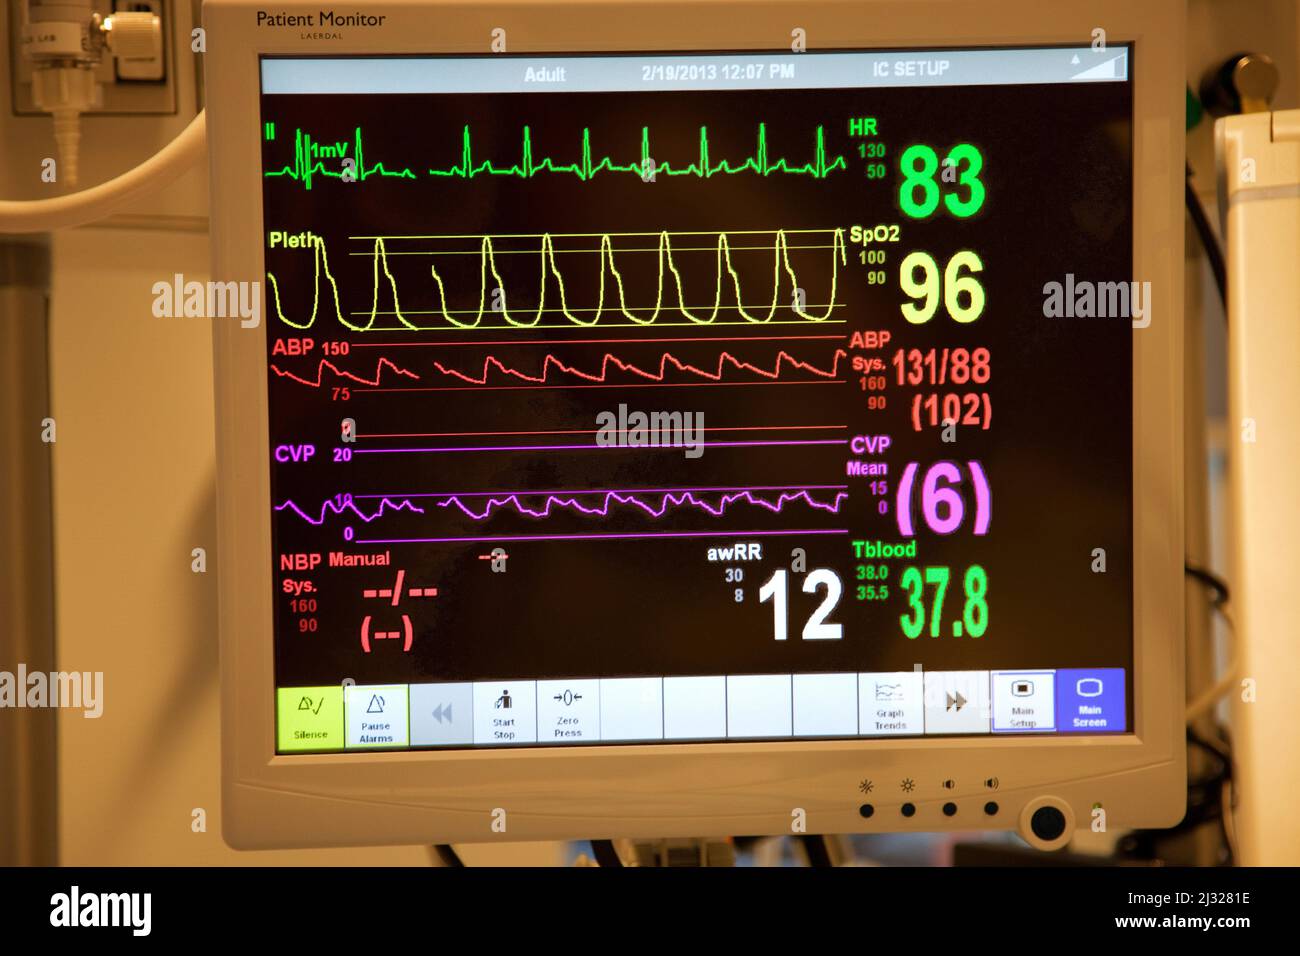 Netherlands, a patient monitor in hospital to show ao heart rate, blood and oxygen. Stock Photo